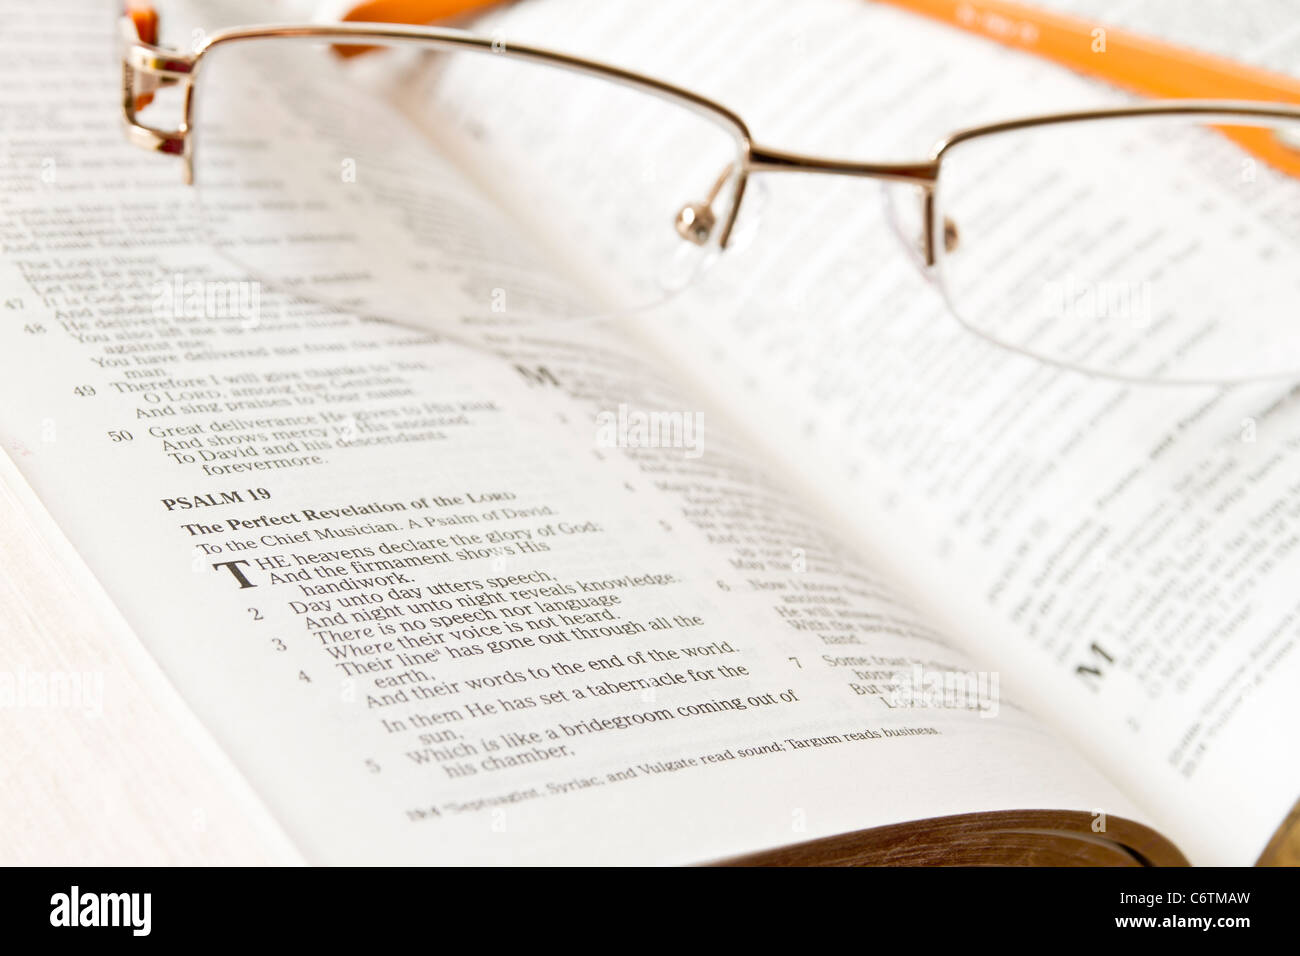 Holy Bible opened with glasses on it Stock Photo